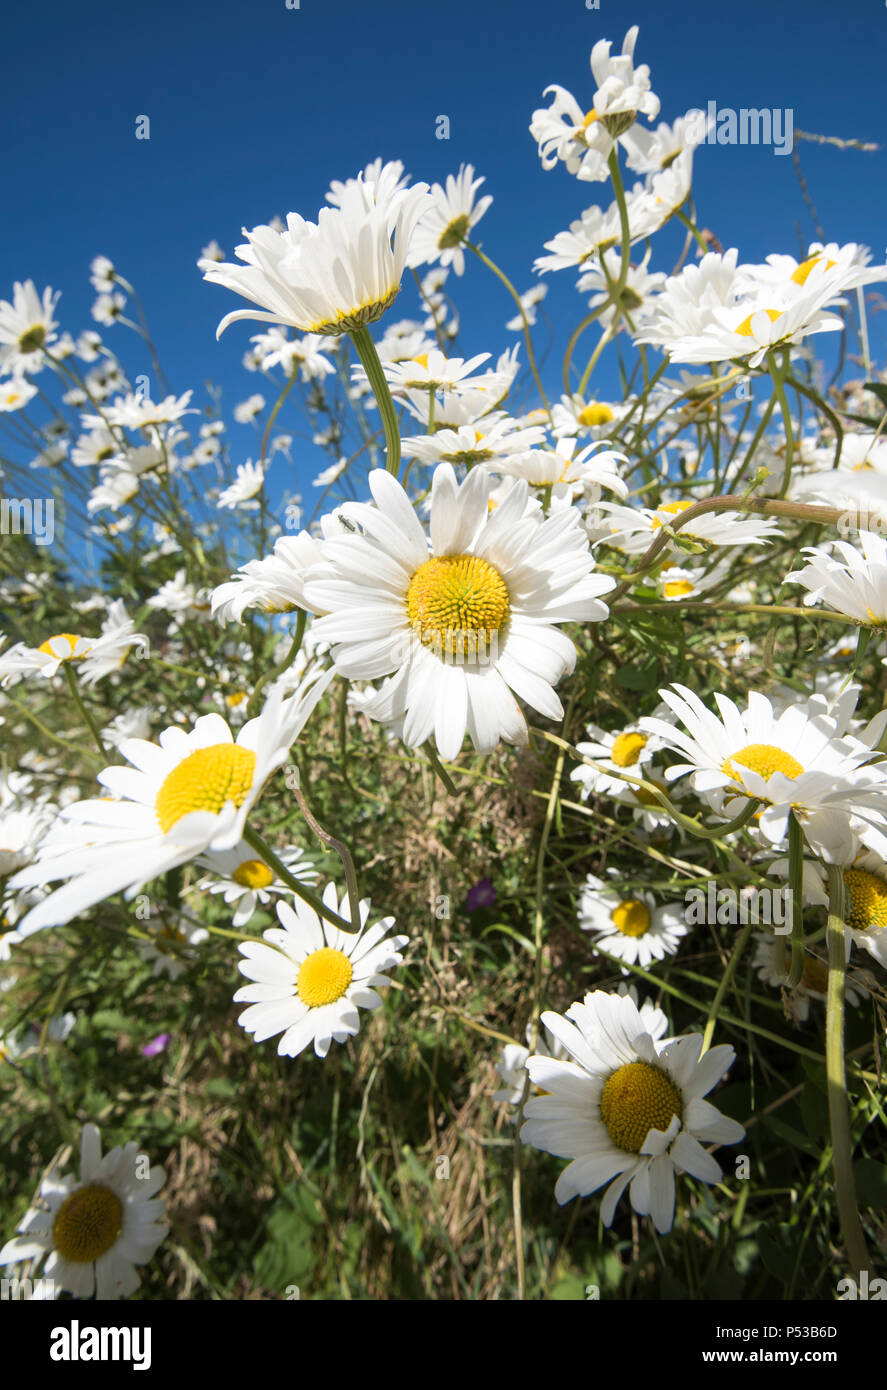 Close up of a field of pretty white daisies, Gedling Nottinghamshire England UK Stock Photo